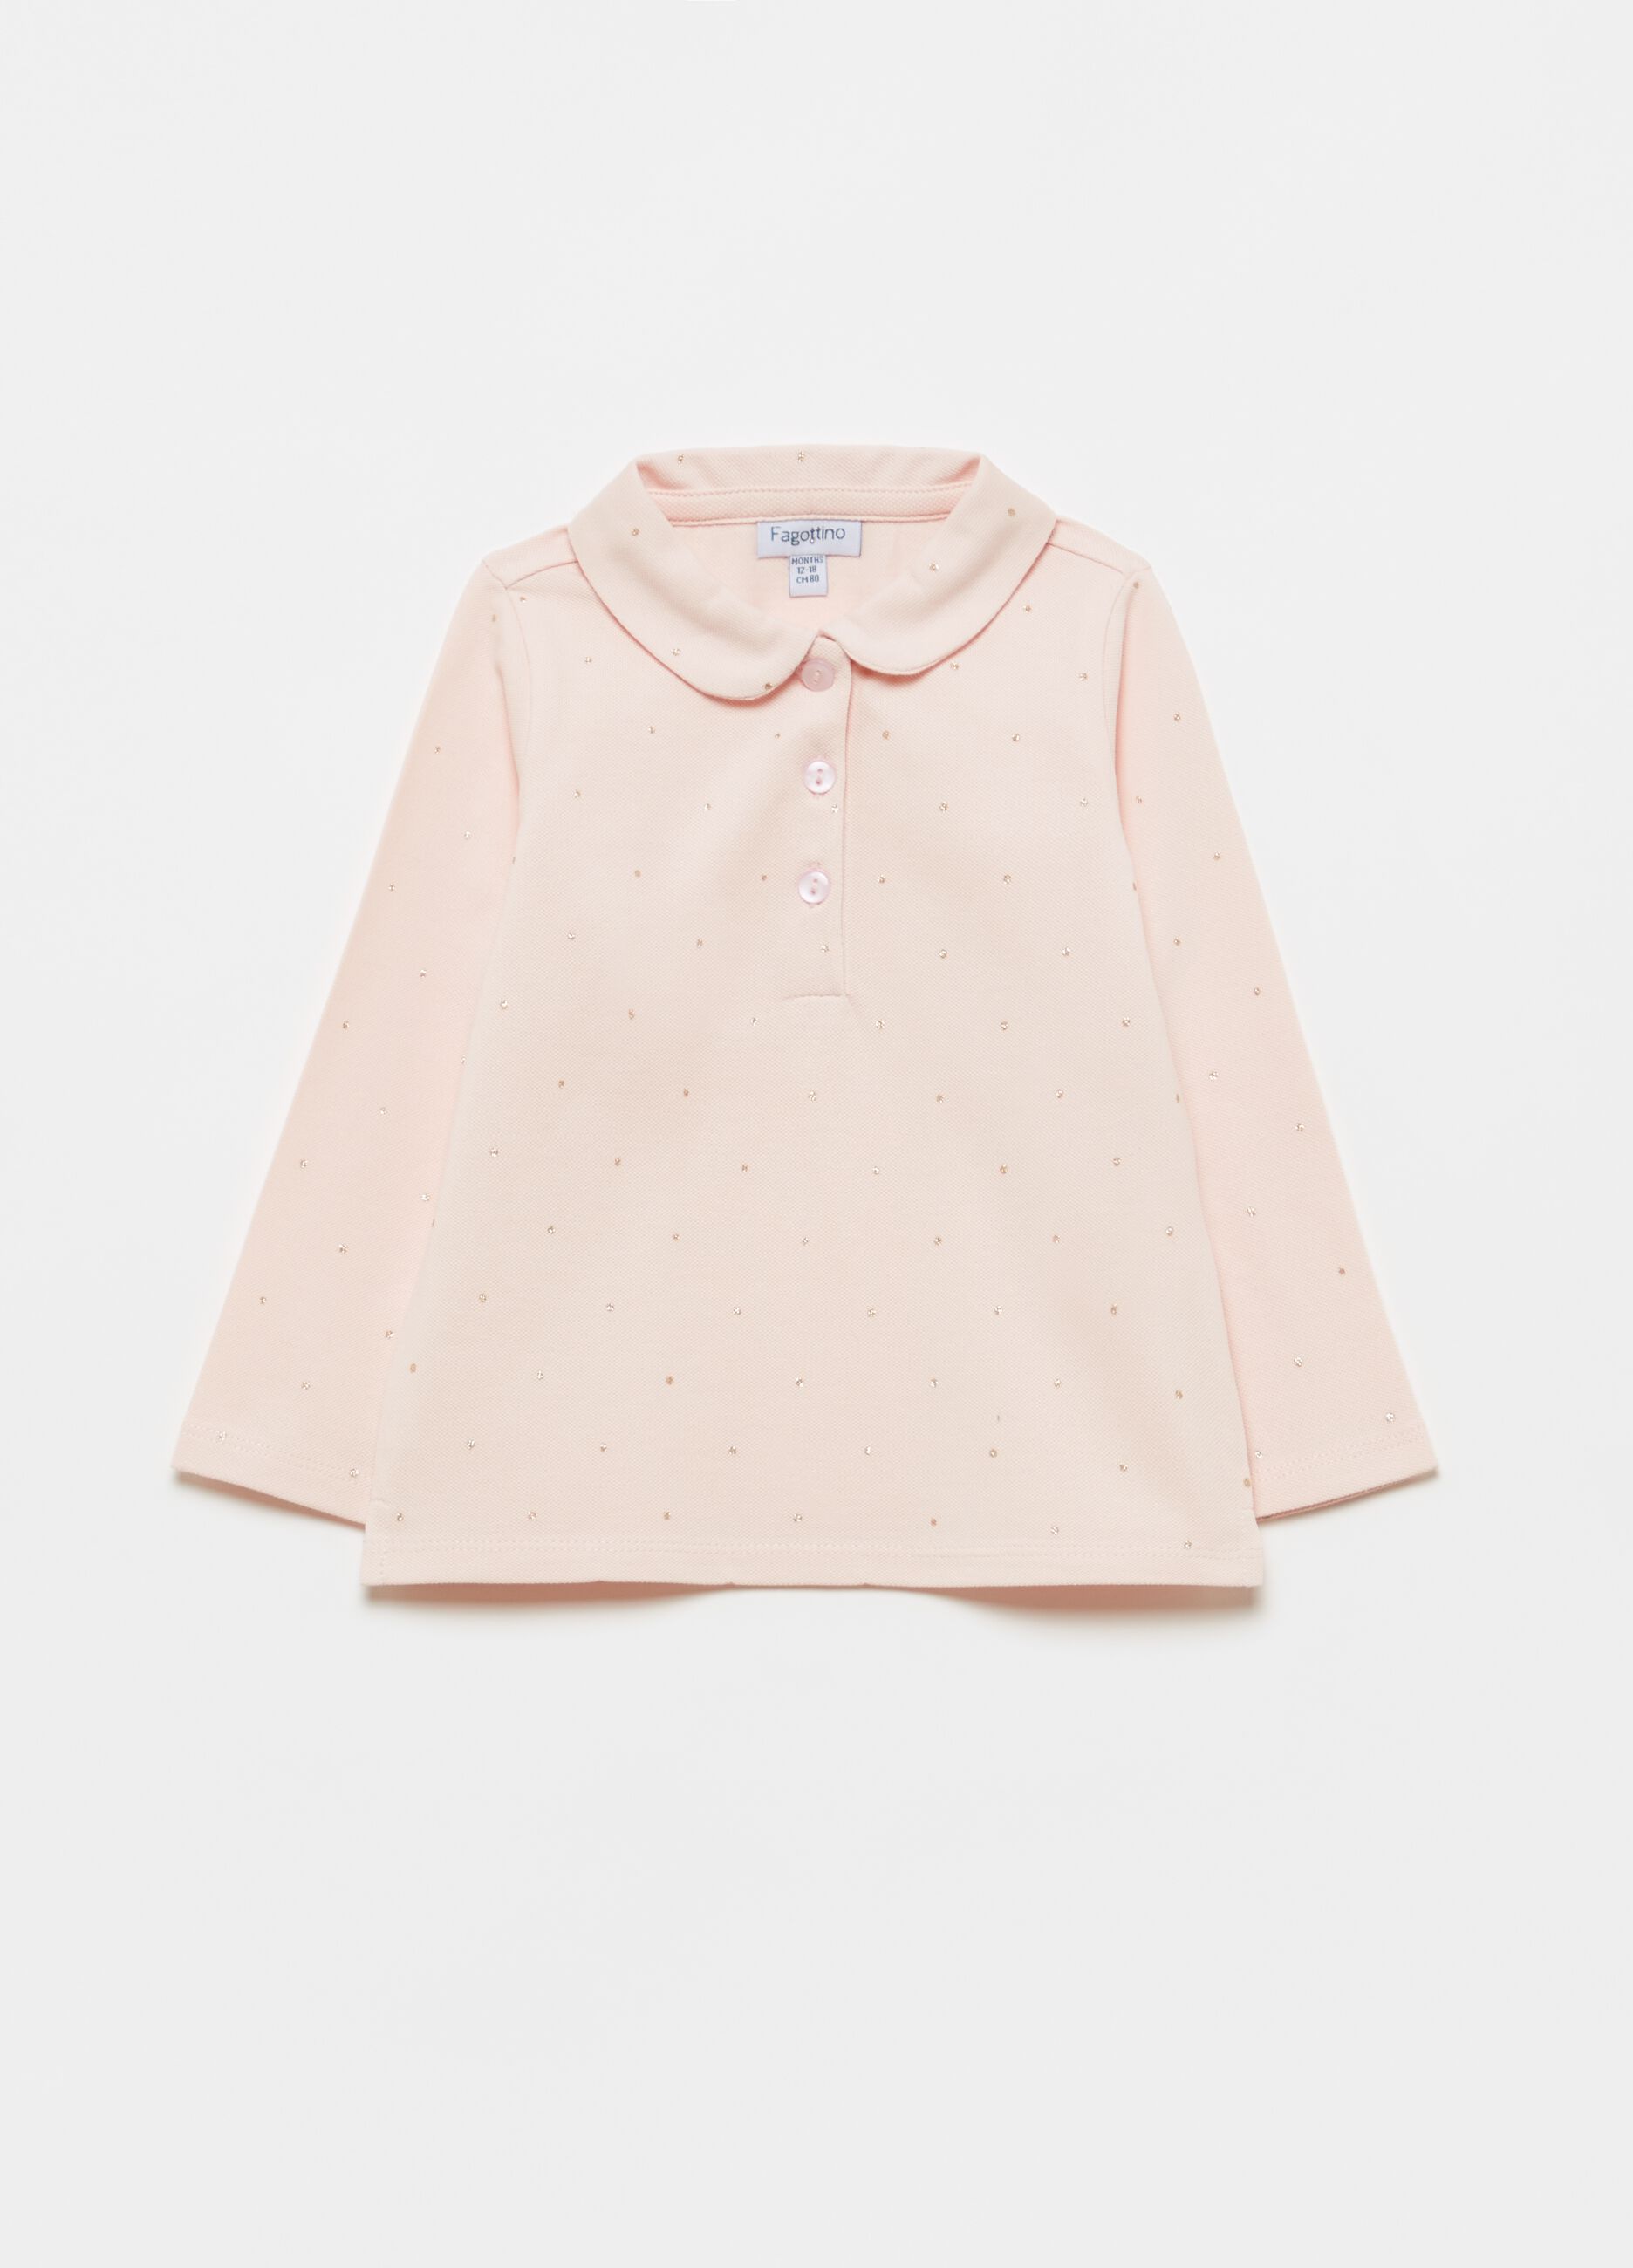 Polo shirt with all-over glitter polka dots print